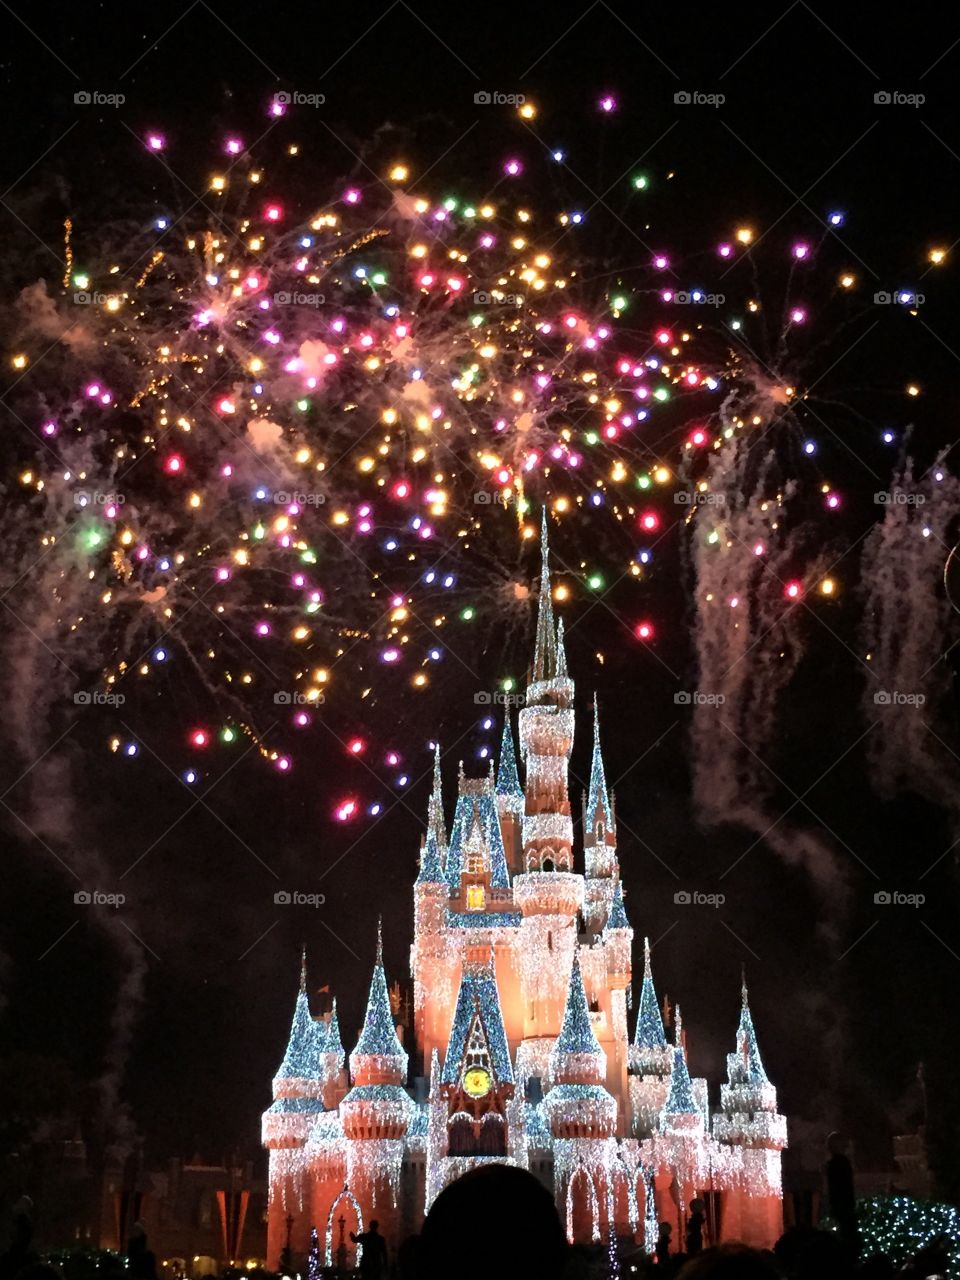 Wishes at the Magic Kingdom. Wishes- the nightly fireworks display at the Magic Kingdom with Cinderella Castle at Disney World in Orlando, Florida.